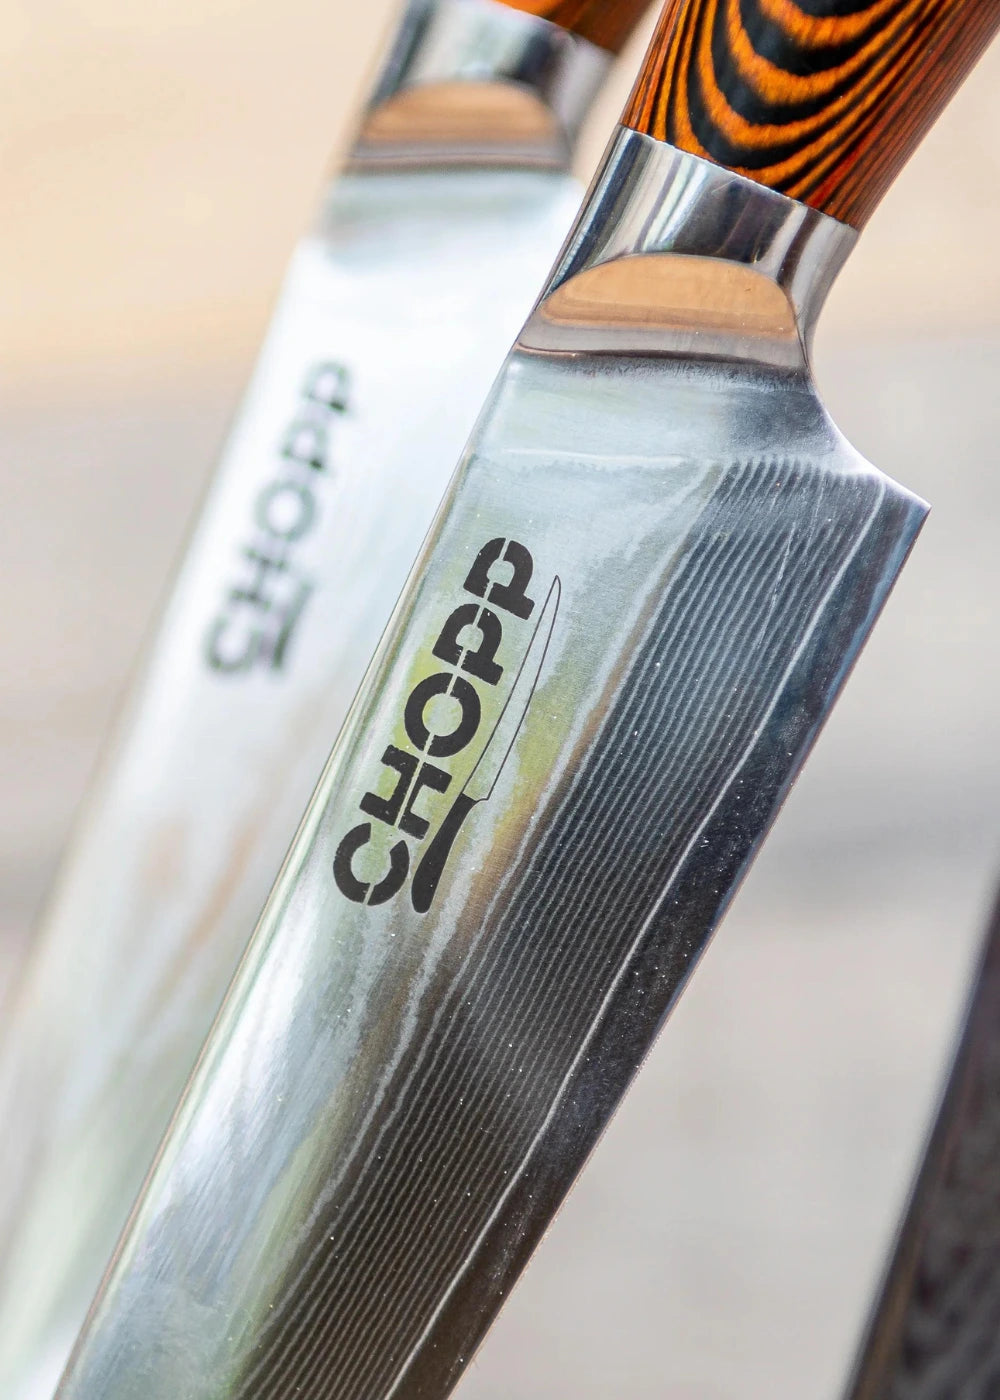 Chopp Knives made in the Cotswolds